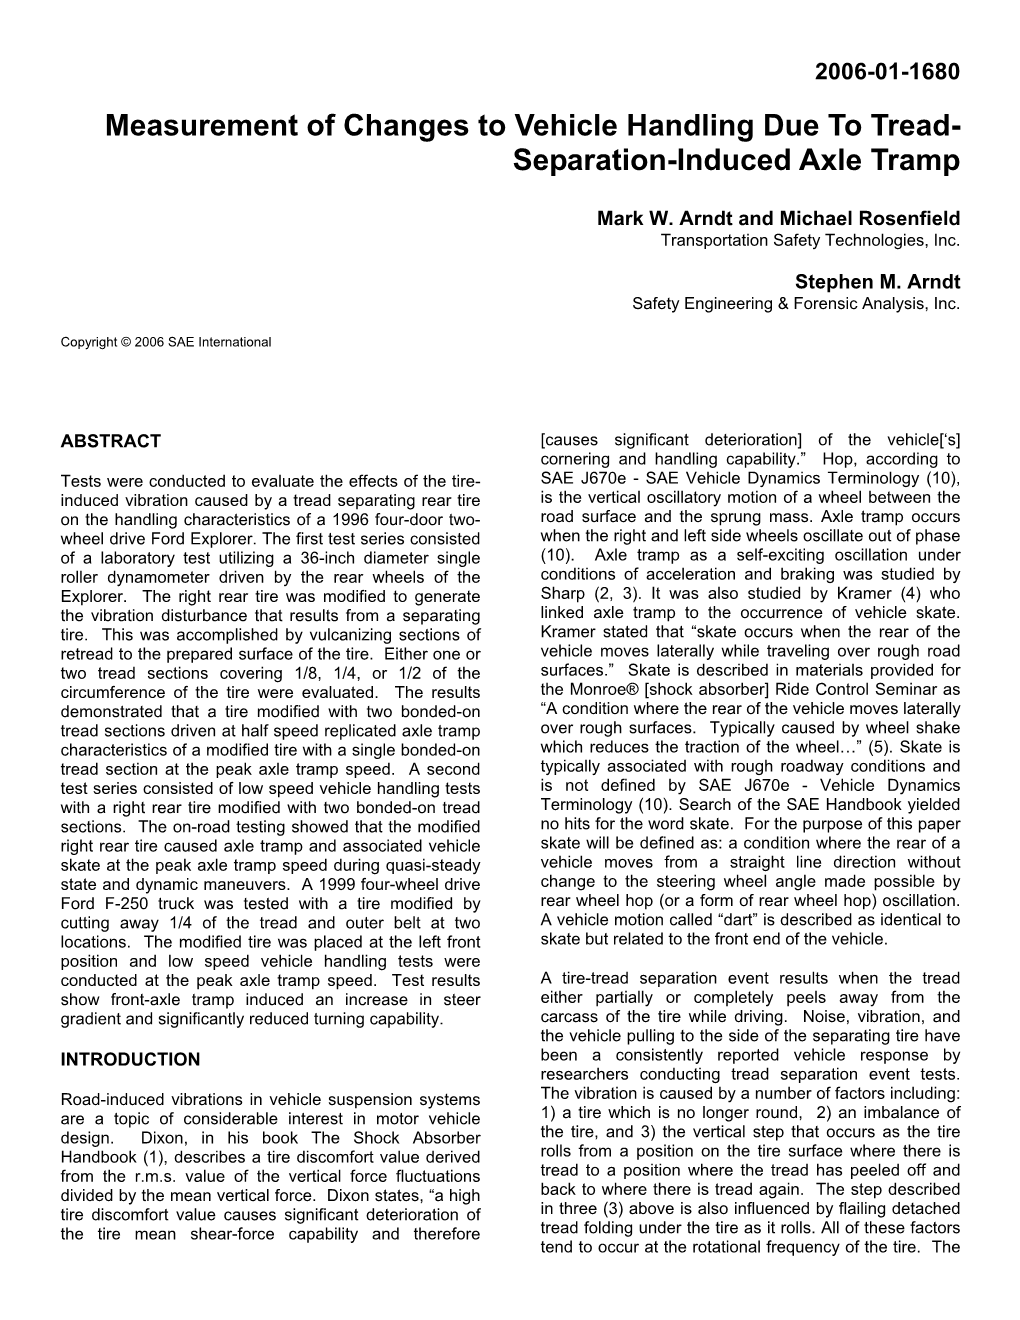 Measurement of Changes to Vehicle Handling Due to Tread- Separation-Induced Axle Tramp